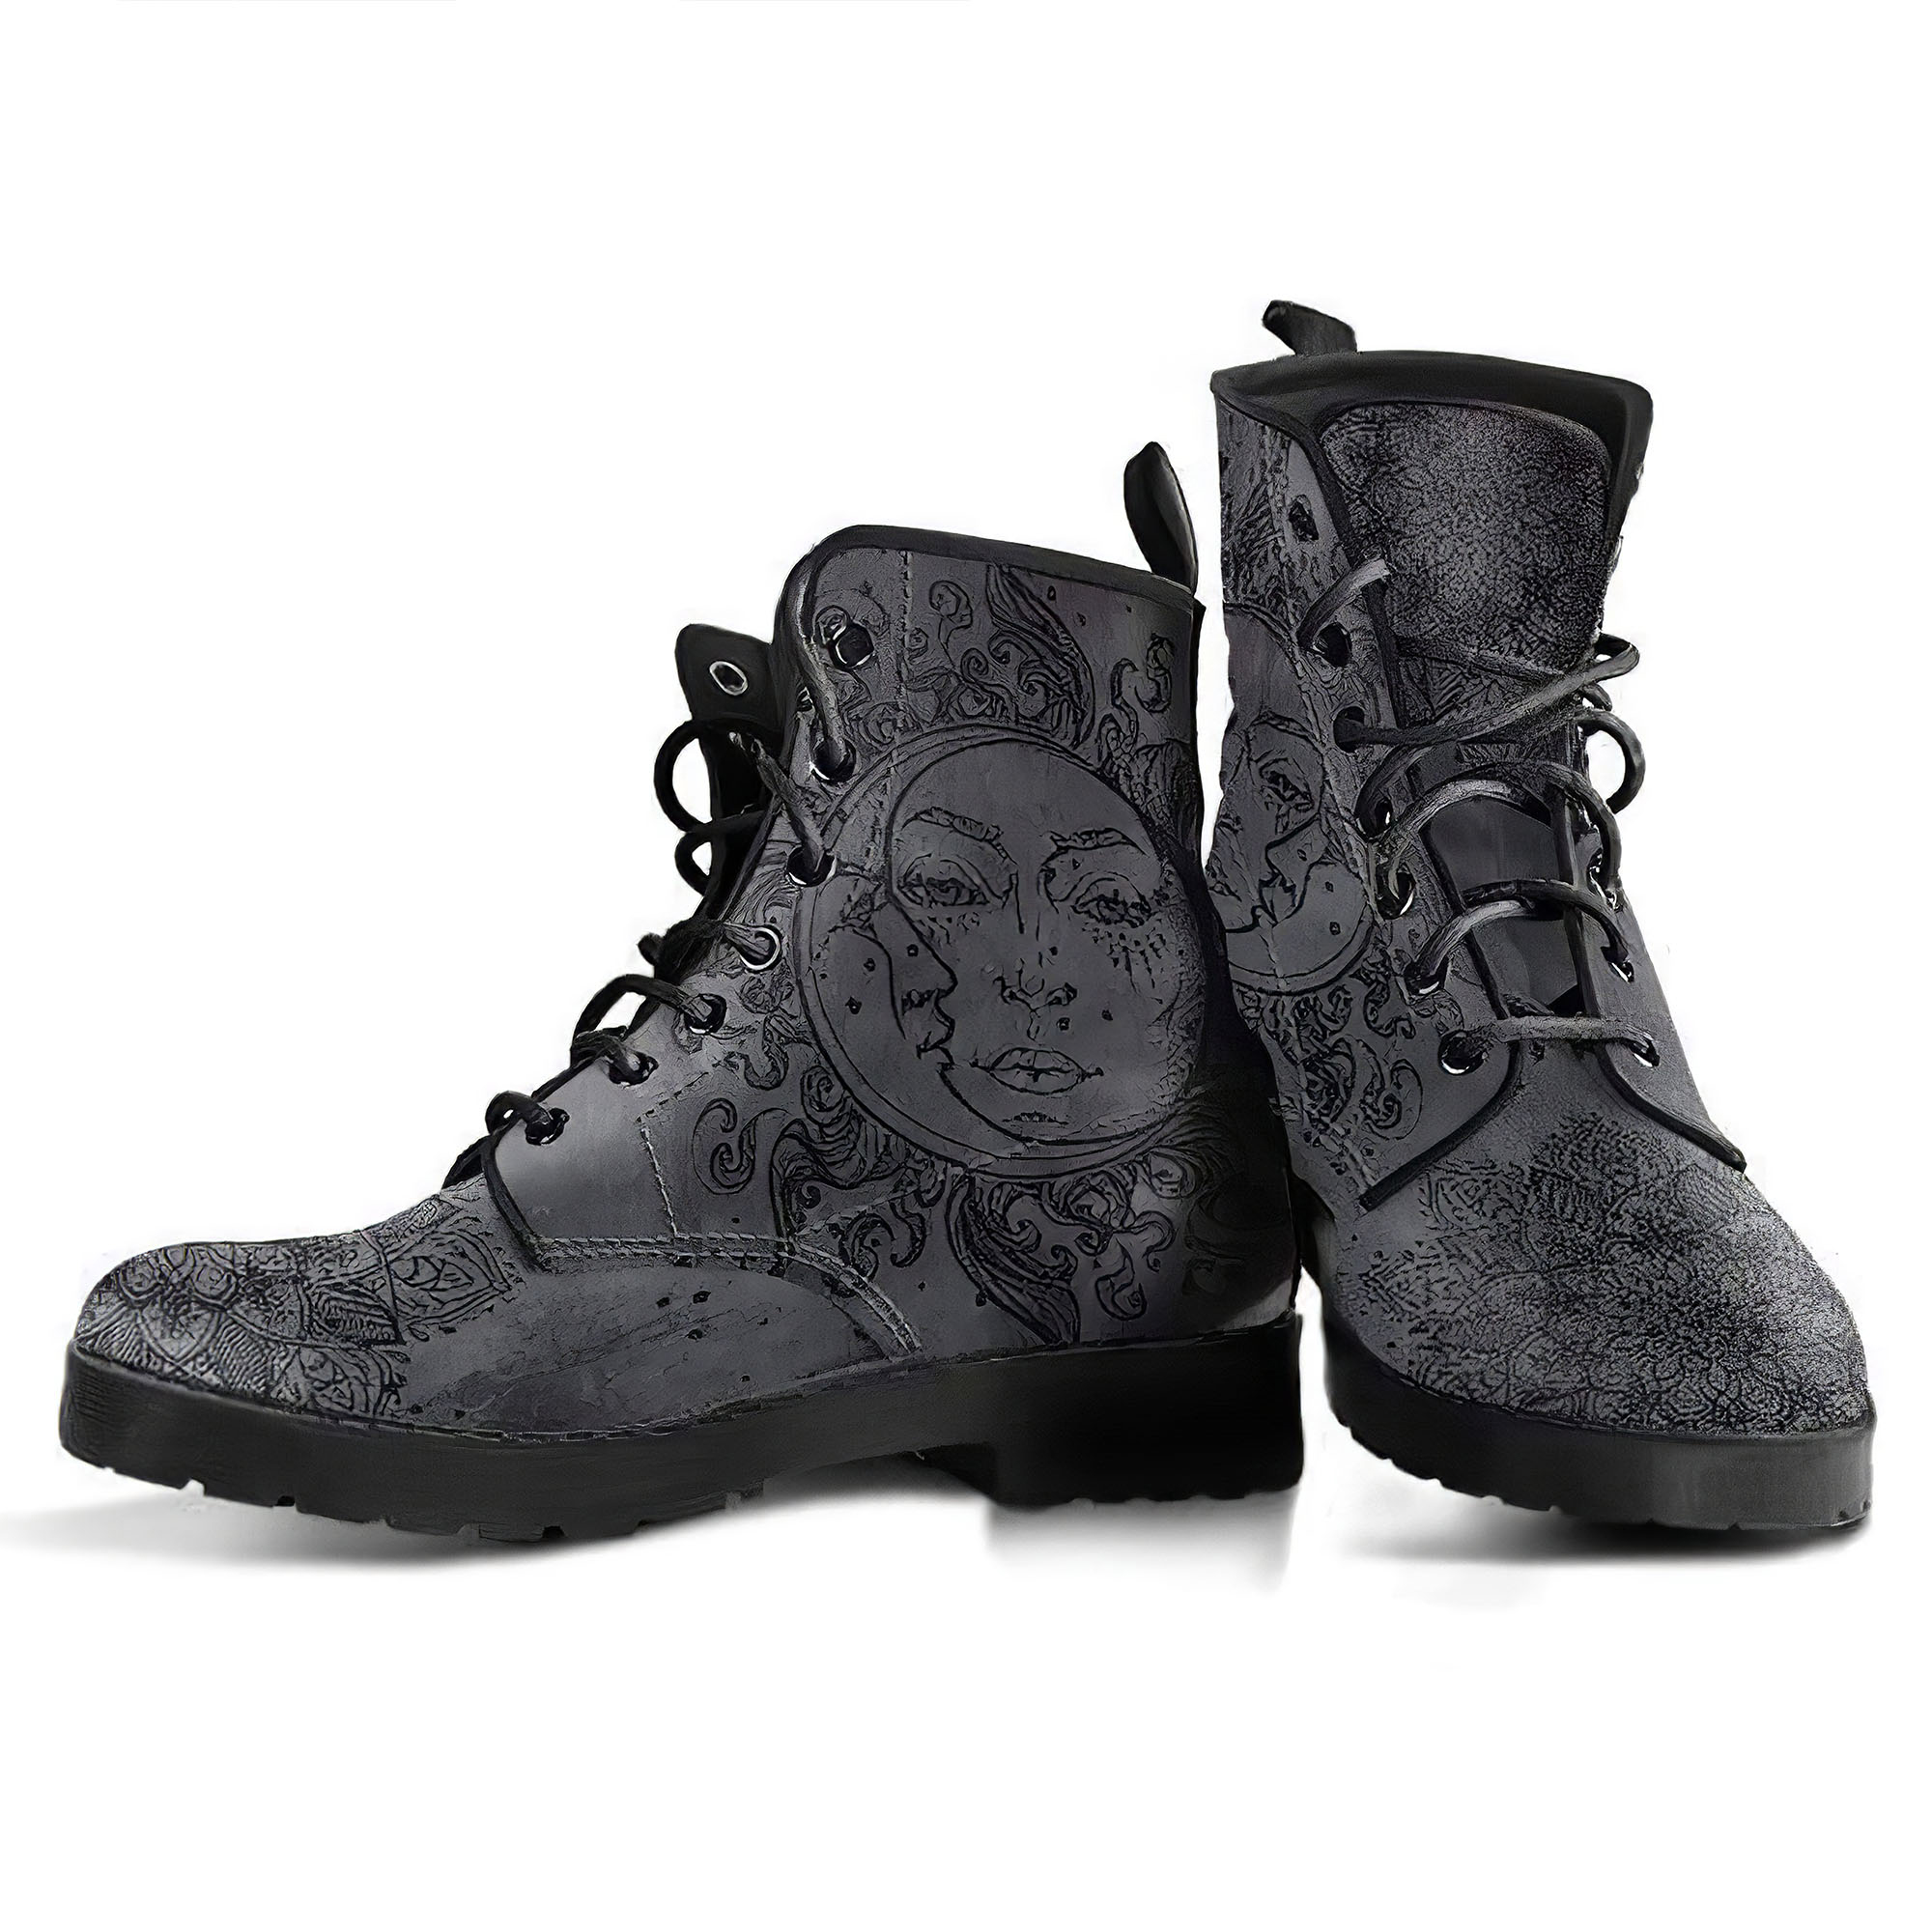 grey-sun-and-moon-handcrafted-boots-1-gp-main.jpg